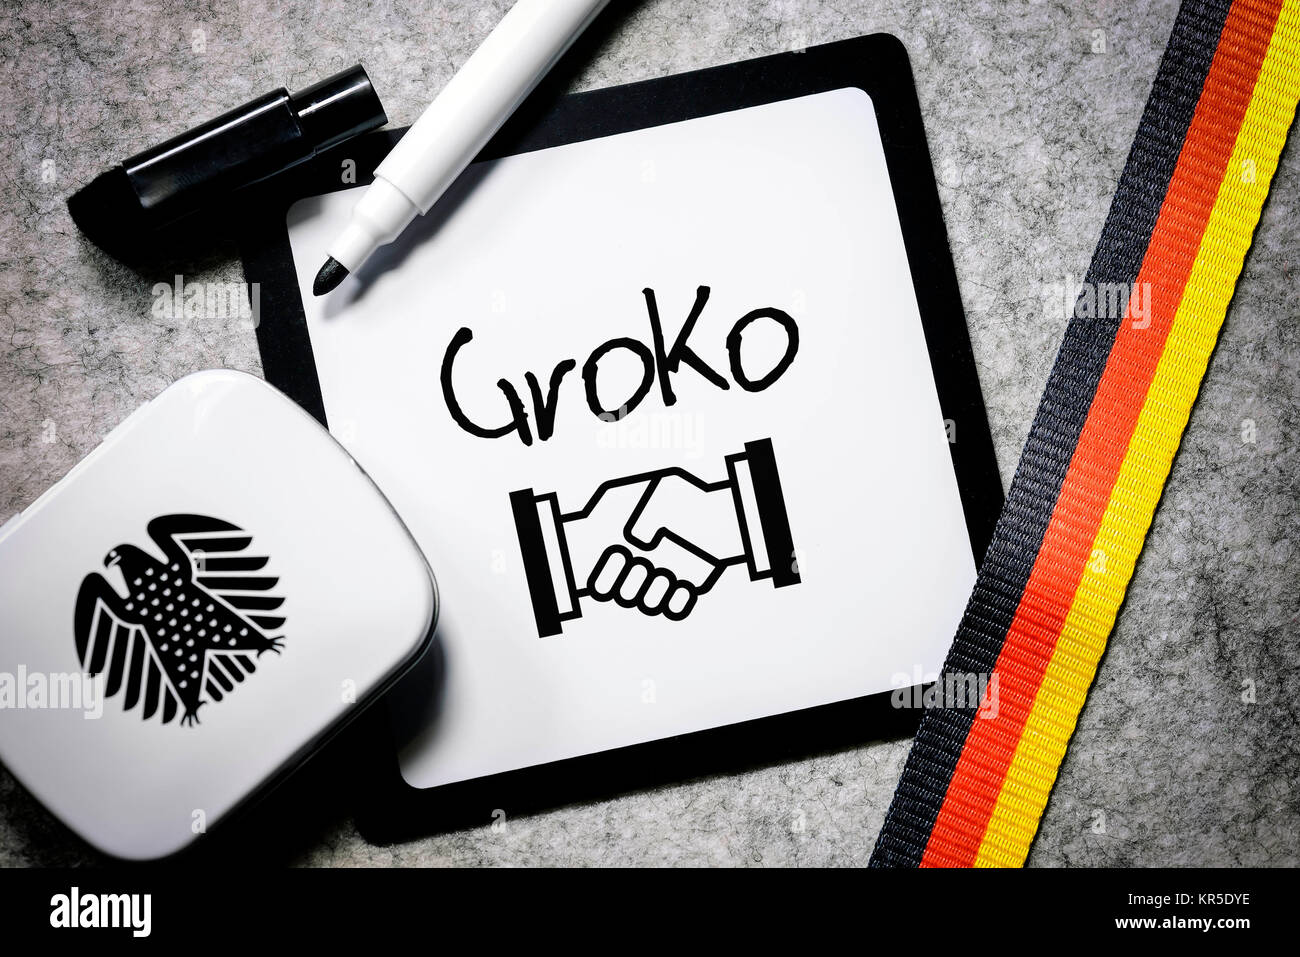 Writing board with the label GroKo, symbolic photo for grand coalition, Schreibtafel mit der Aufschrift GroKo, Symbolfoto für Große Koalition Stock Photo